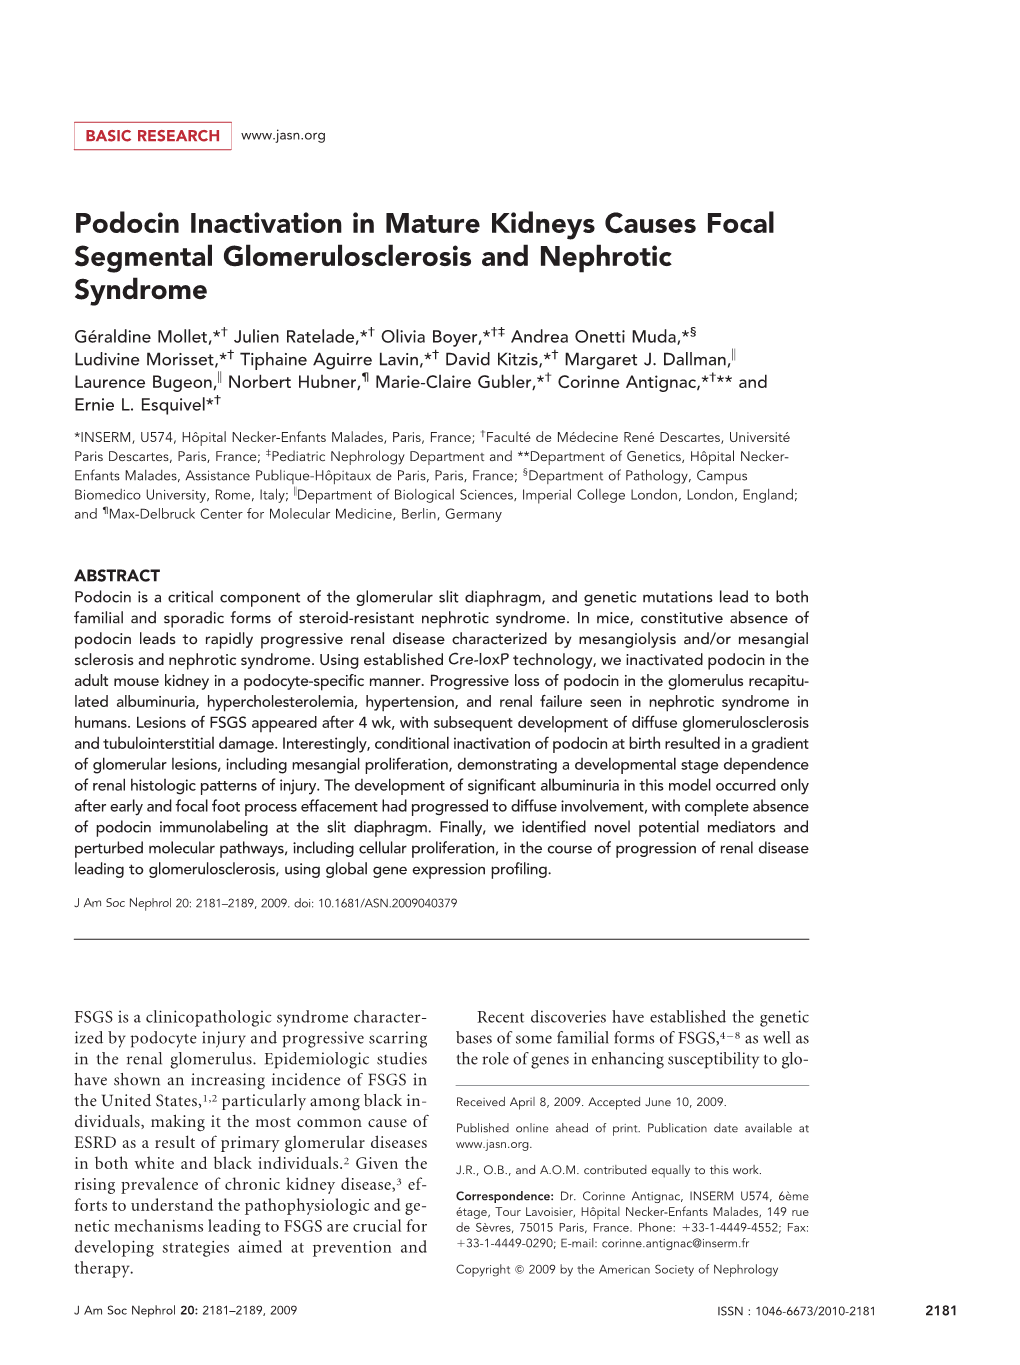 Podocin Inactivation in Mature Kidneys Causes Focal Segmental Glomerulosclerosis and Nephrotic Syndrome